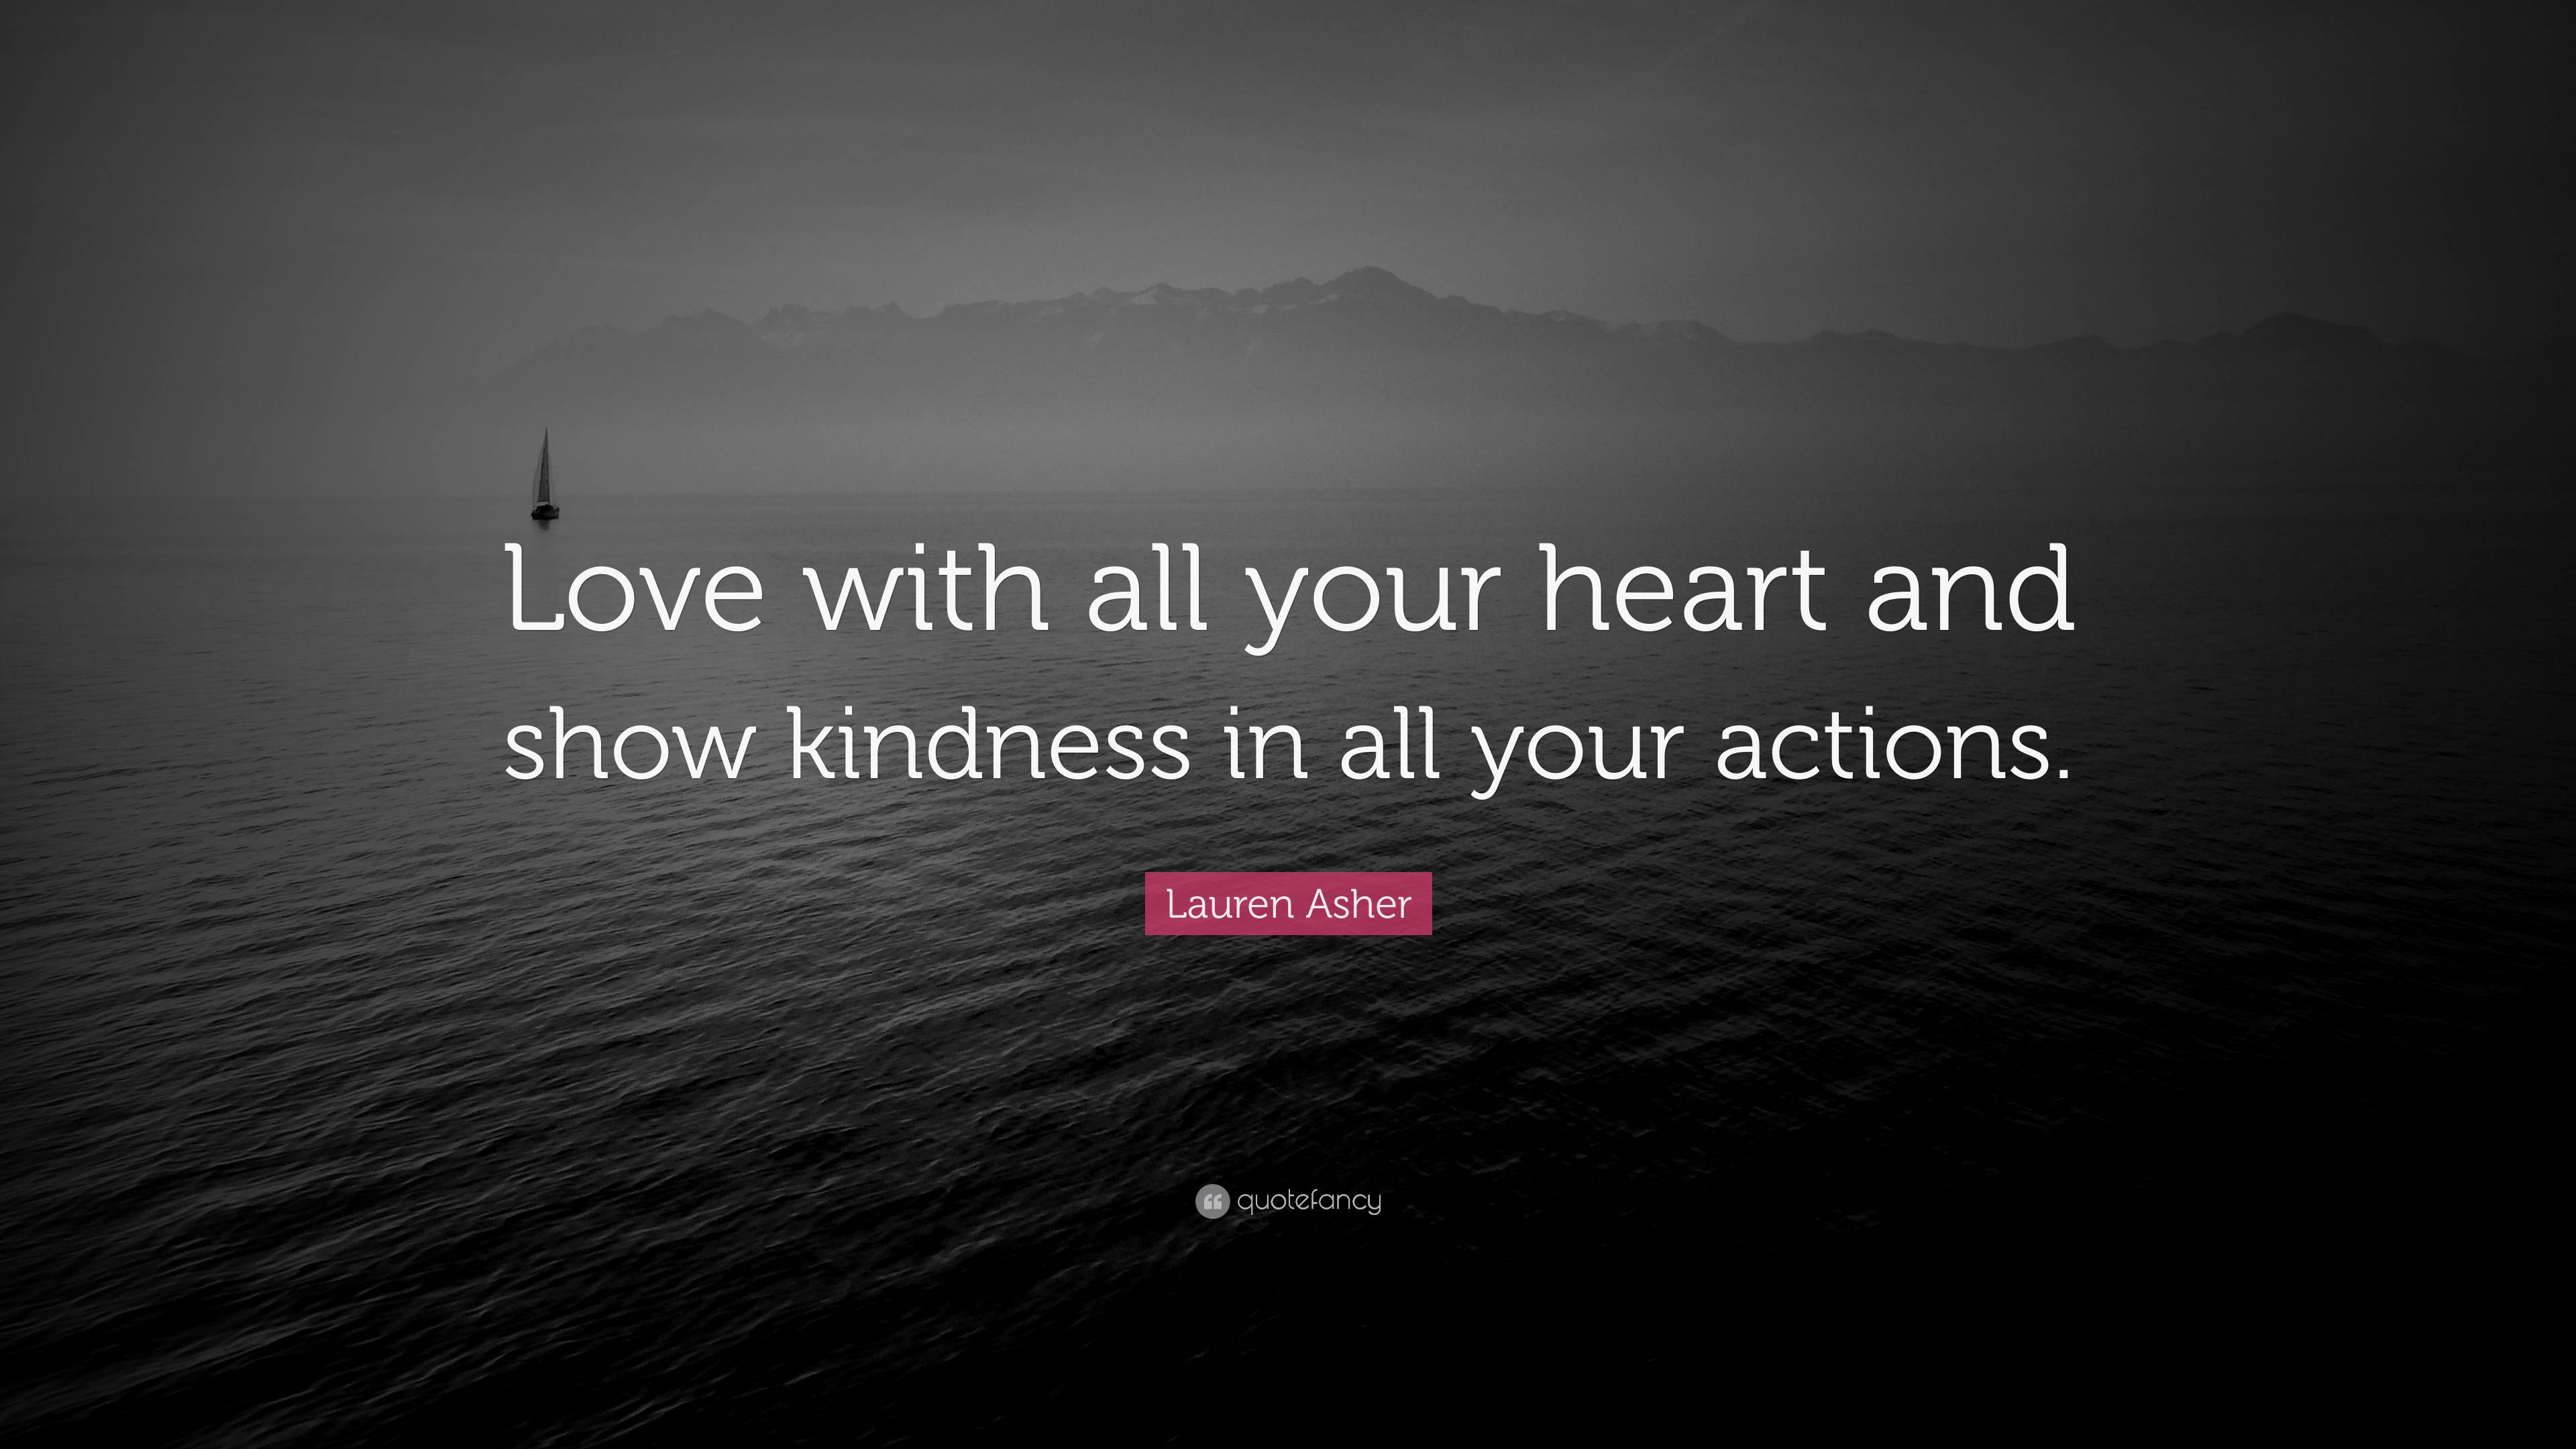 Lauren Asher Quote: “Love with all your heart and show kindness in